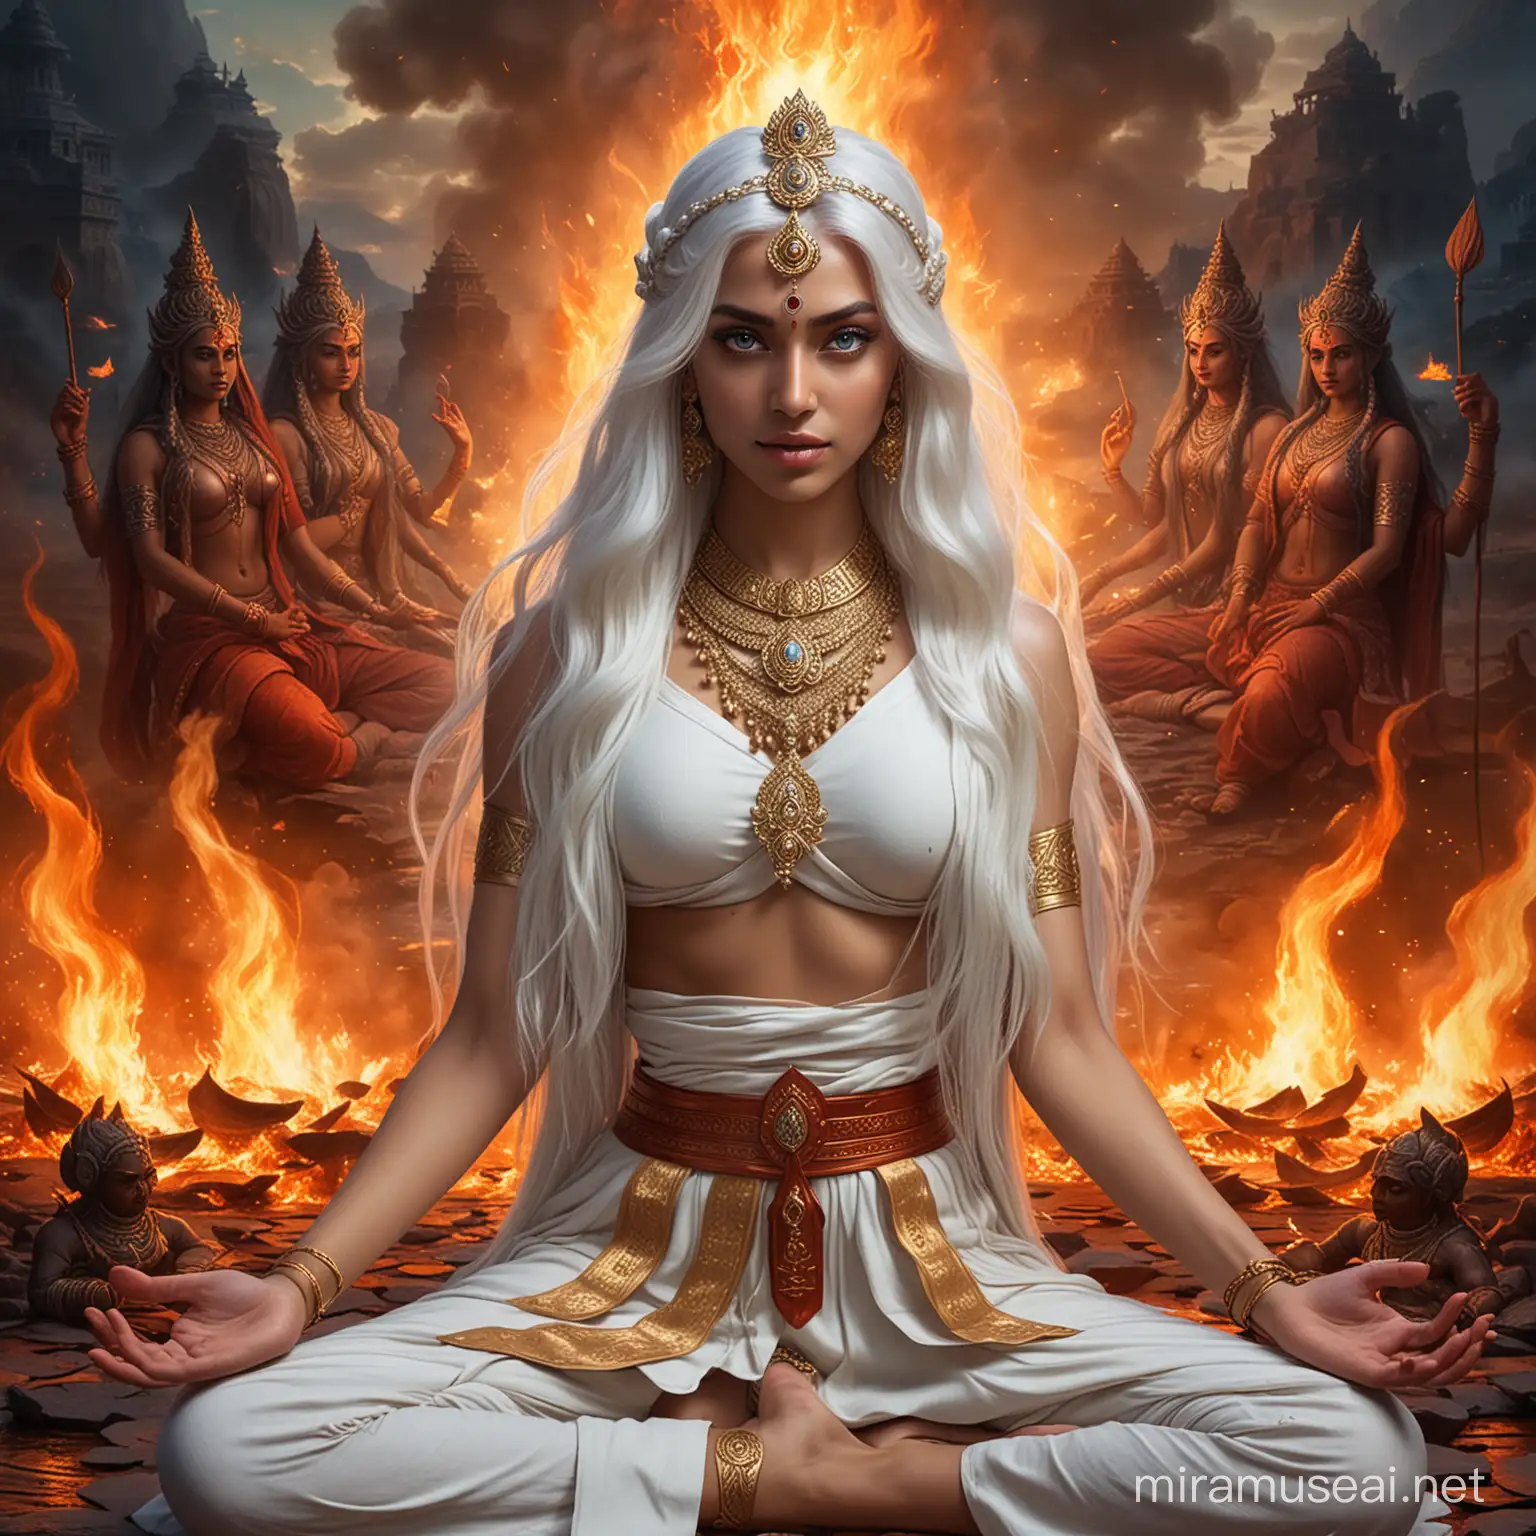 Powerful Hindu Empress in Lotus Pose Amidst Divine Fire and Deities